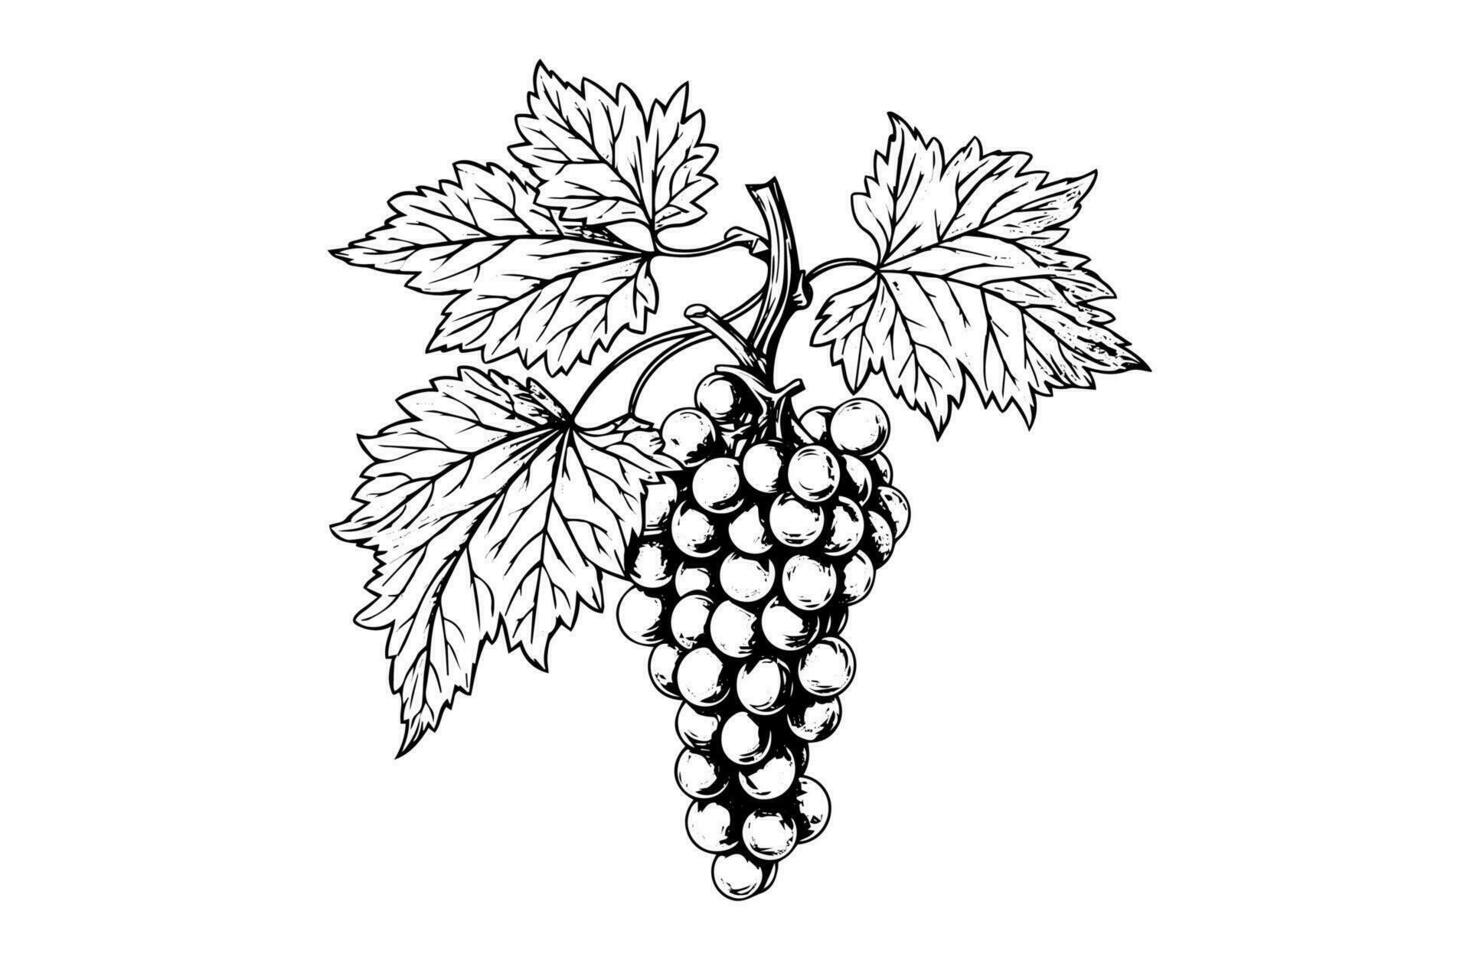 Hand drawn ink sketch of grape on the branch. Engraving style vector illustration.